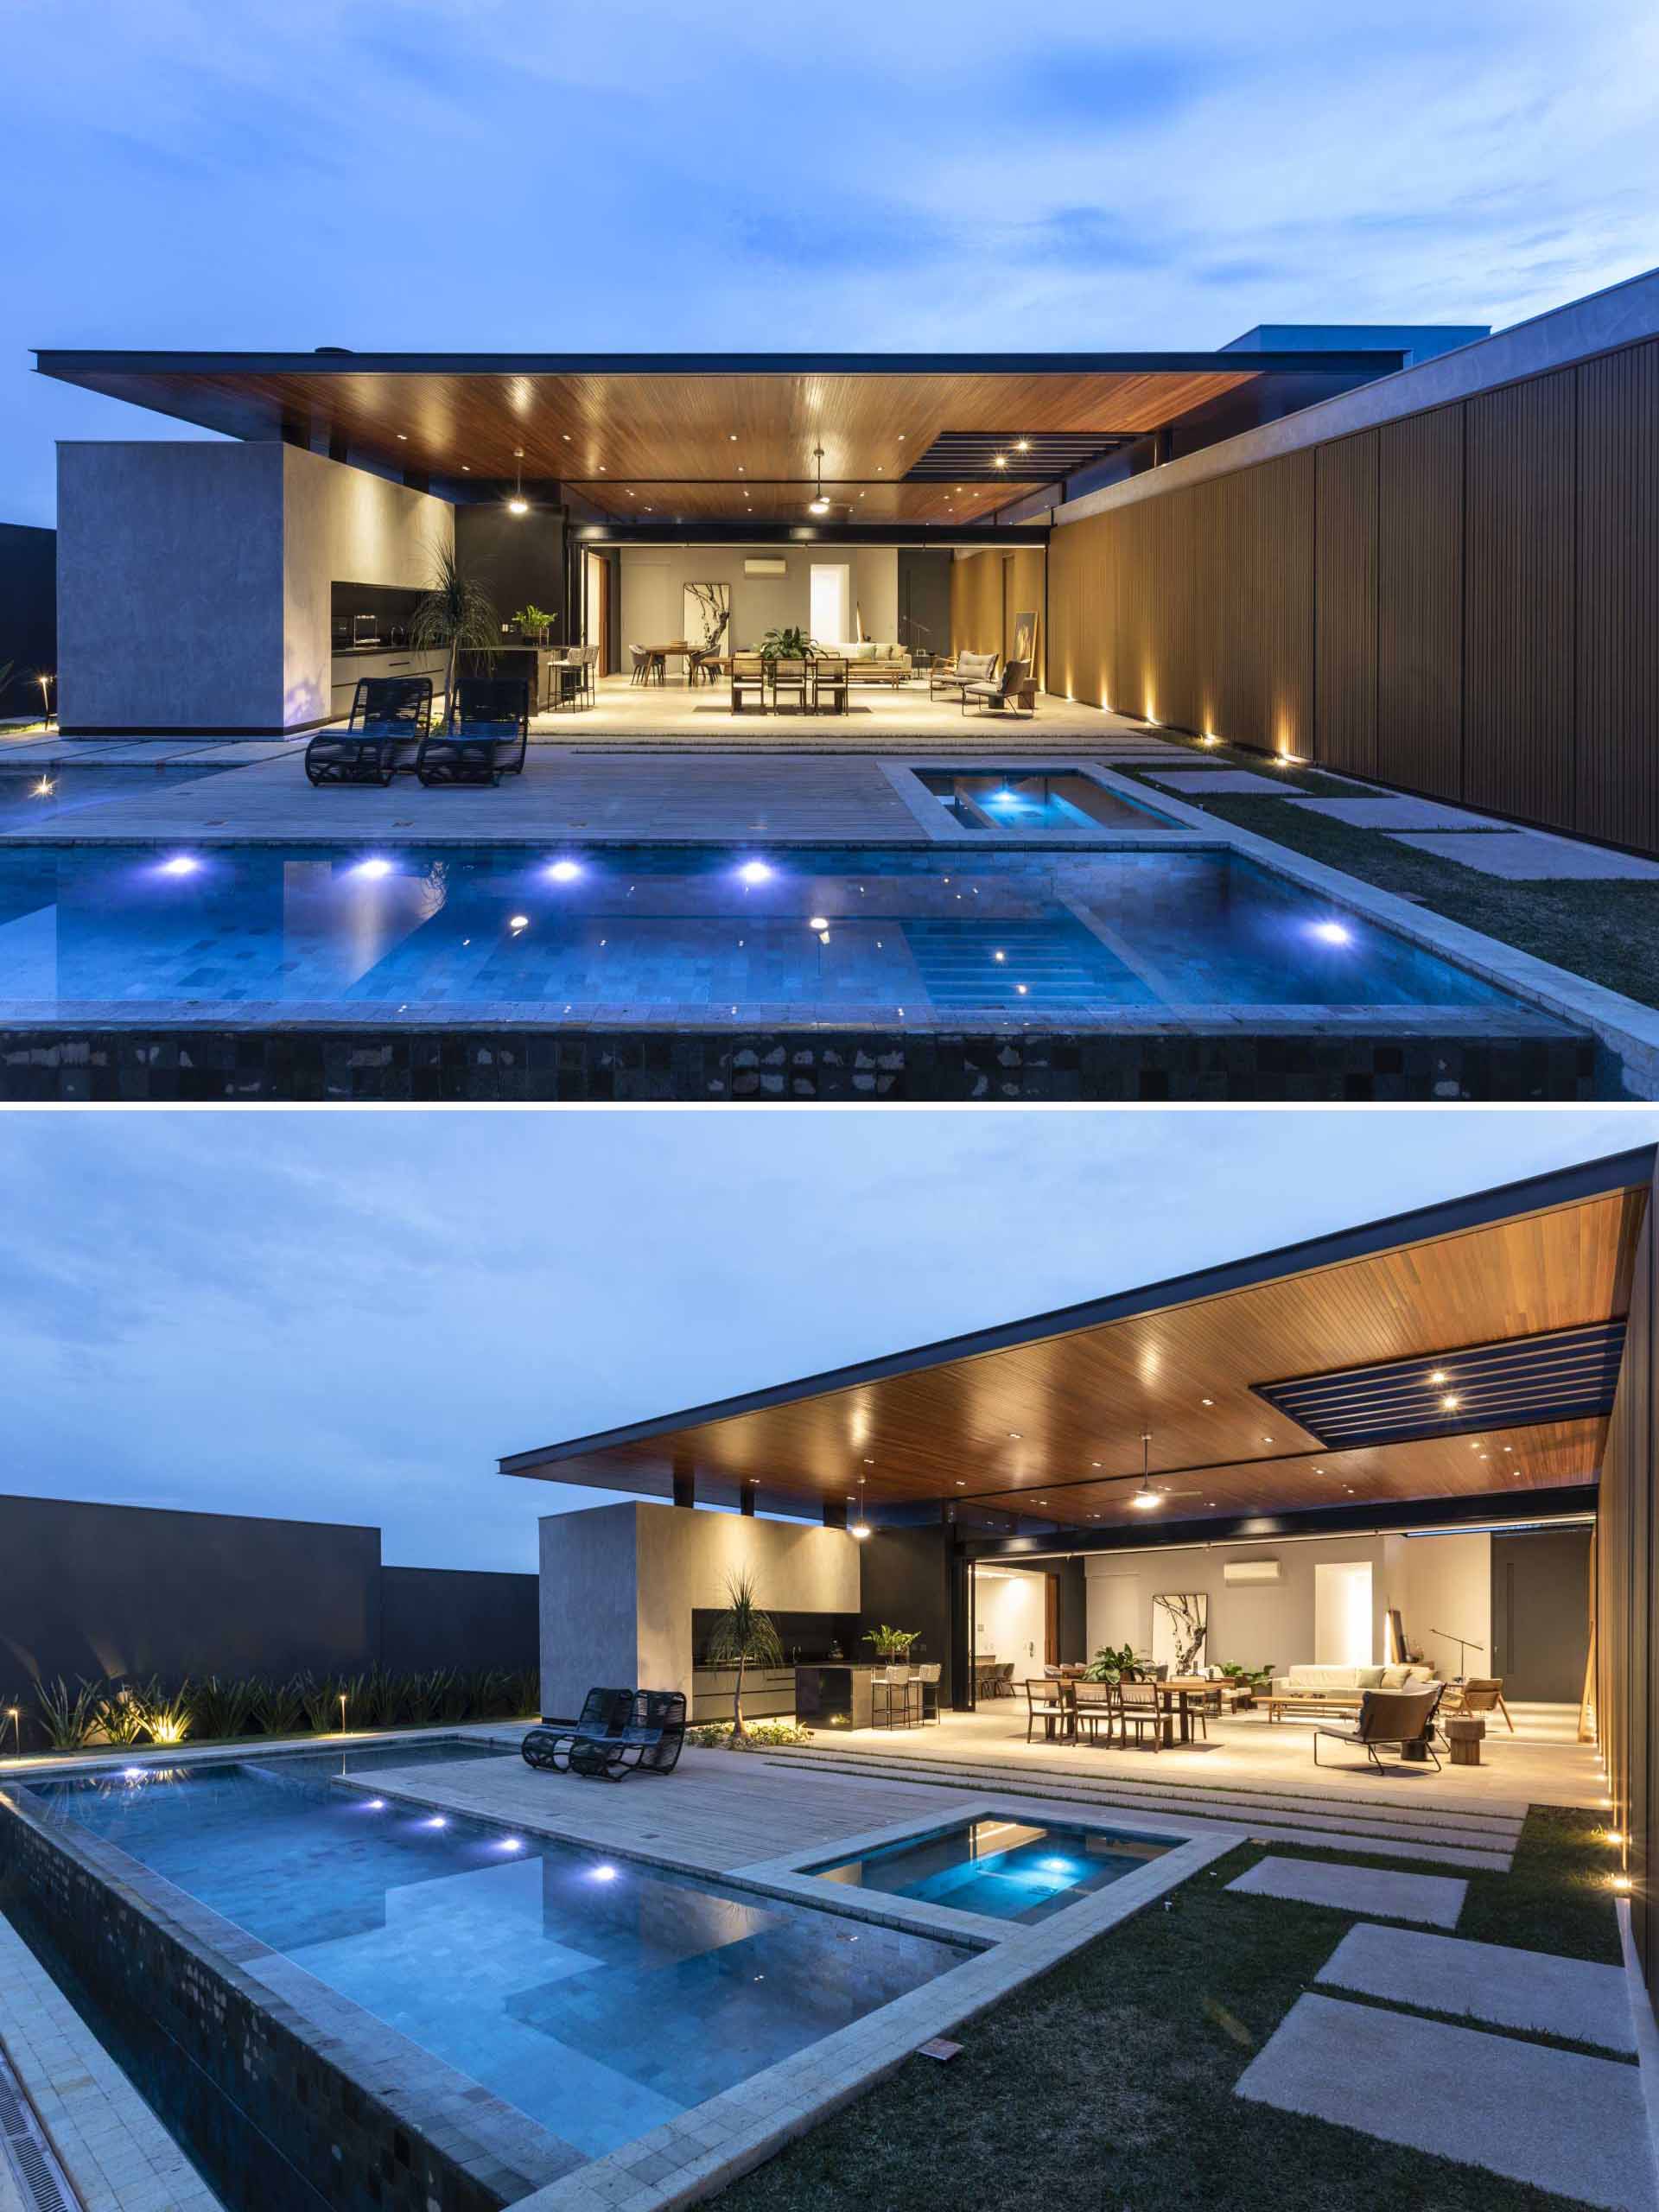 A modern house with a large double-height ceiling that covers both the interior and exterior spaces.